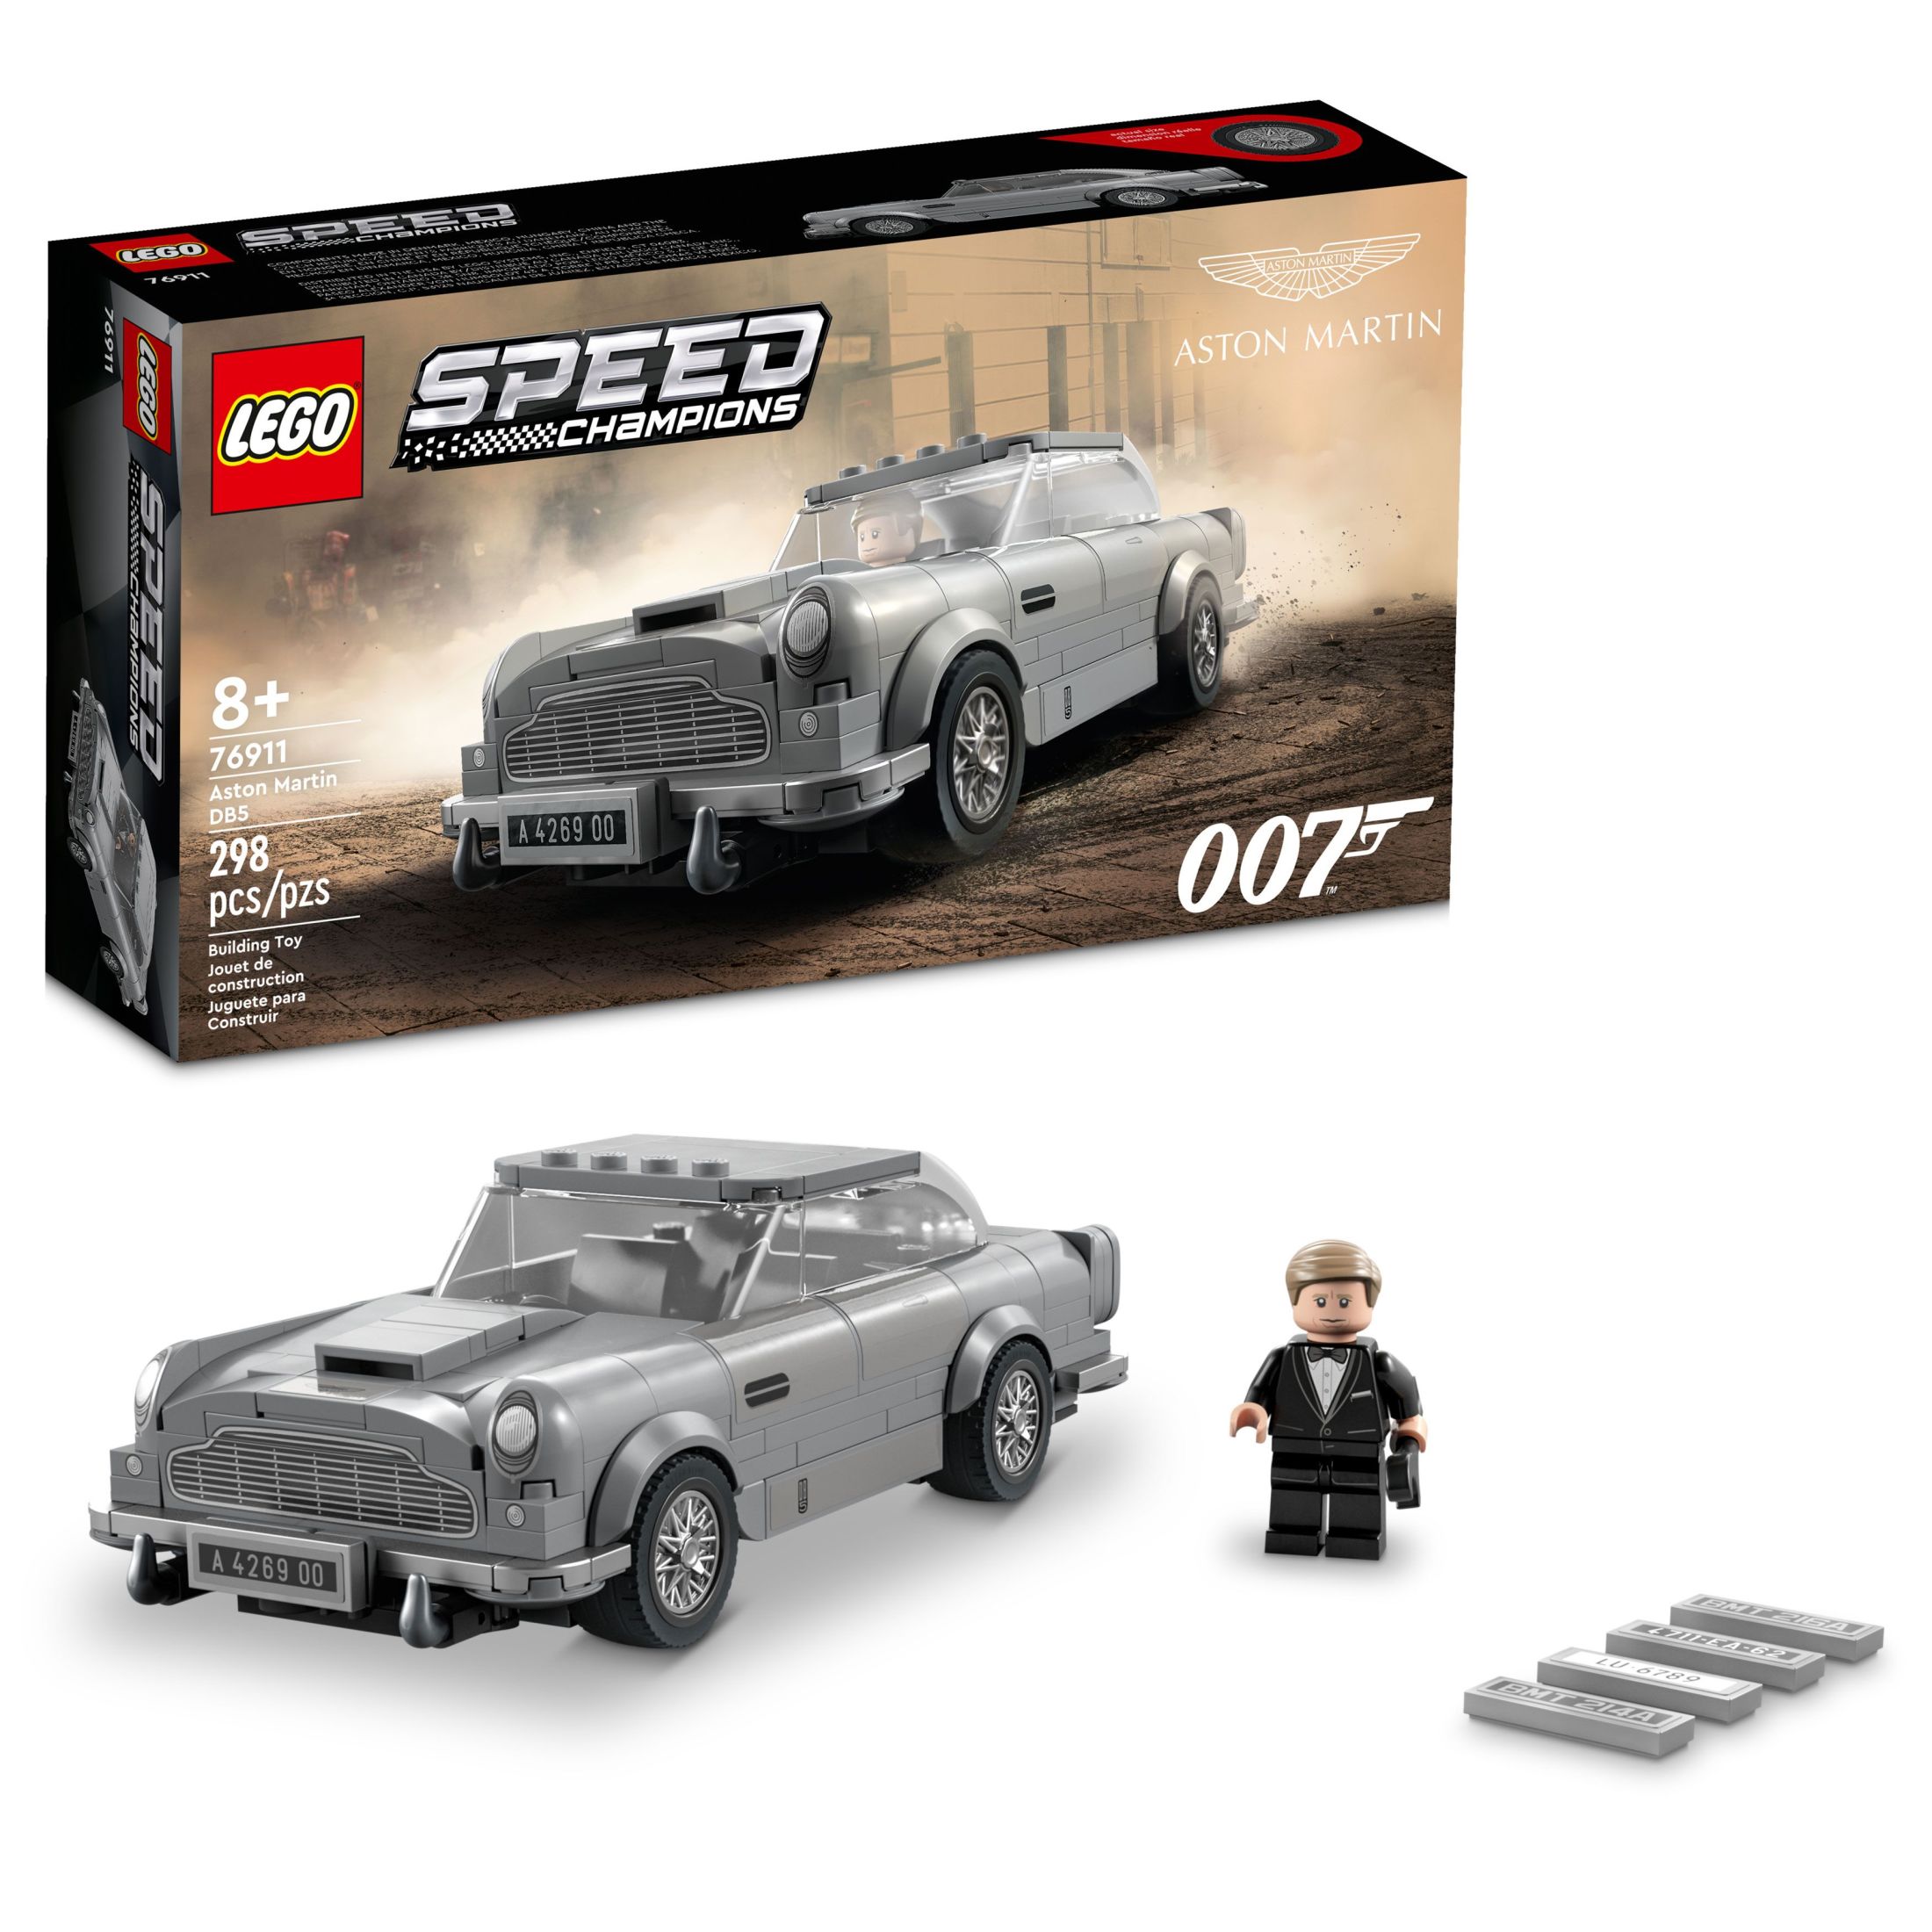 LEGO Speed Champions 007 Aston Martin DB5 76911 Building Toy Set Featuring James Bond Minifigure, Car Model Kit for Kids and Teens, Great Gift for Boys and Girls Ages 8 and Up - image 1 of 8